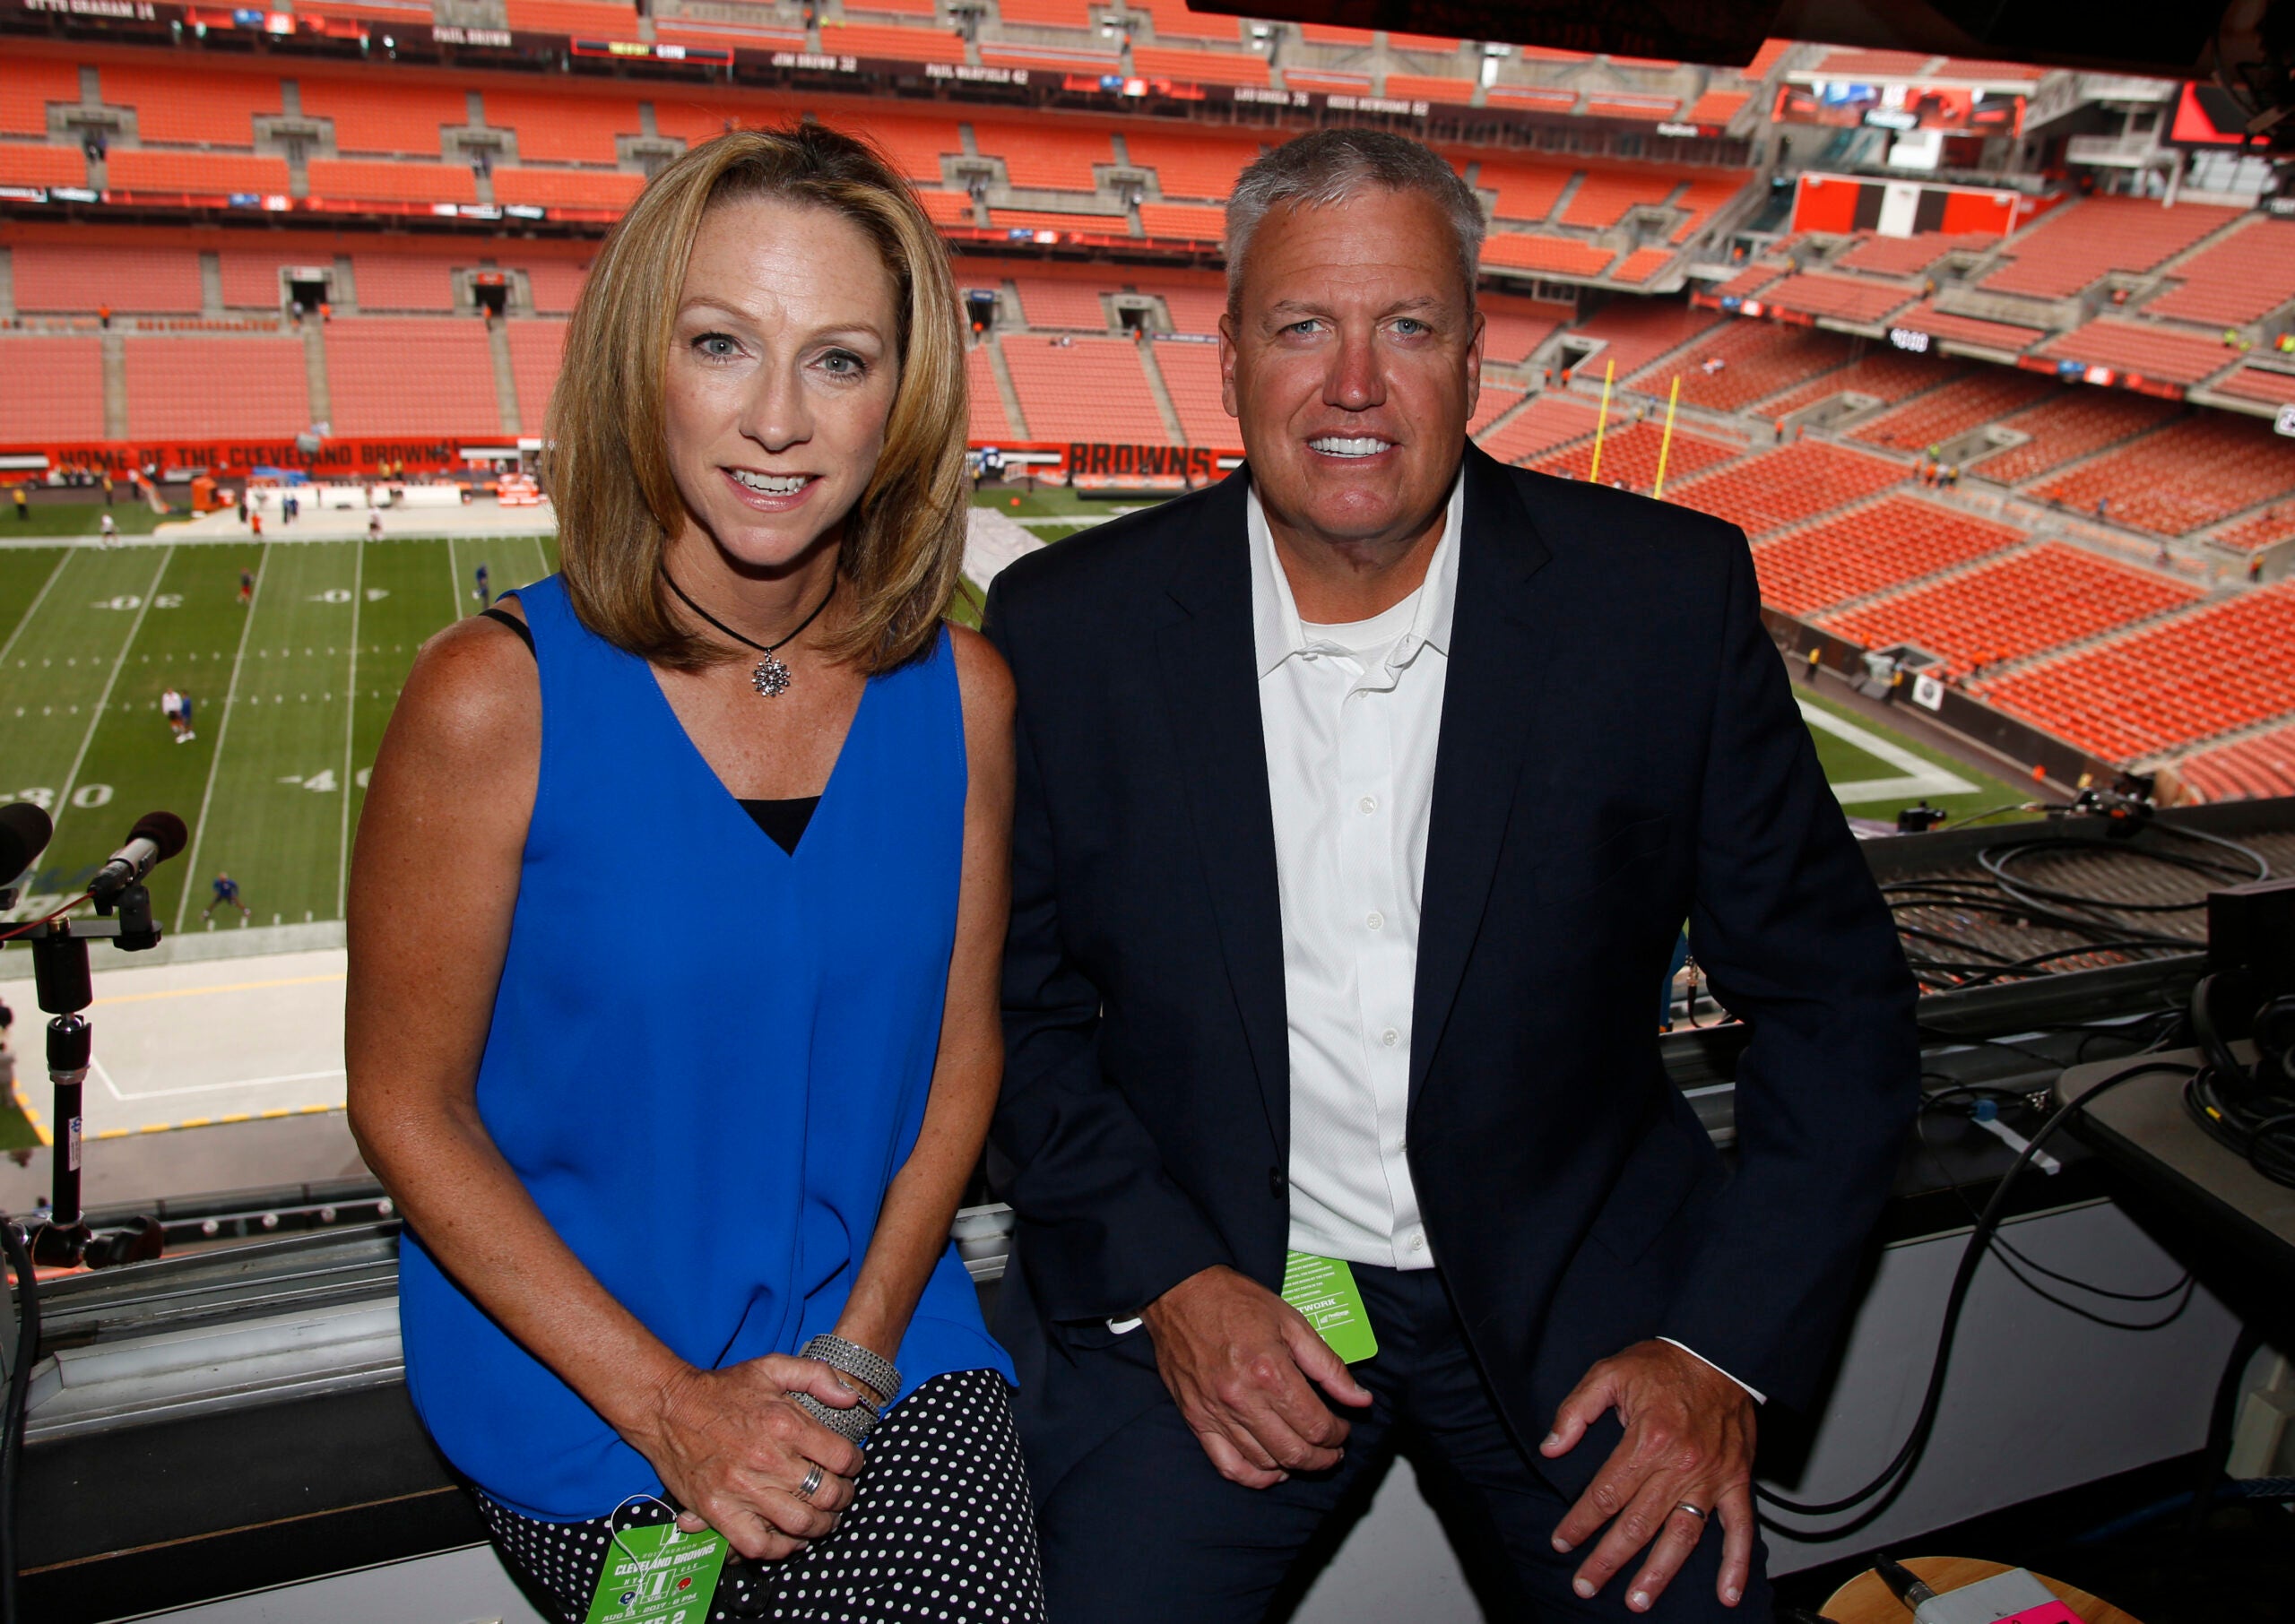 It's no surprise Beth Mowins excelled on Monday Night Football